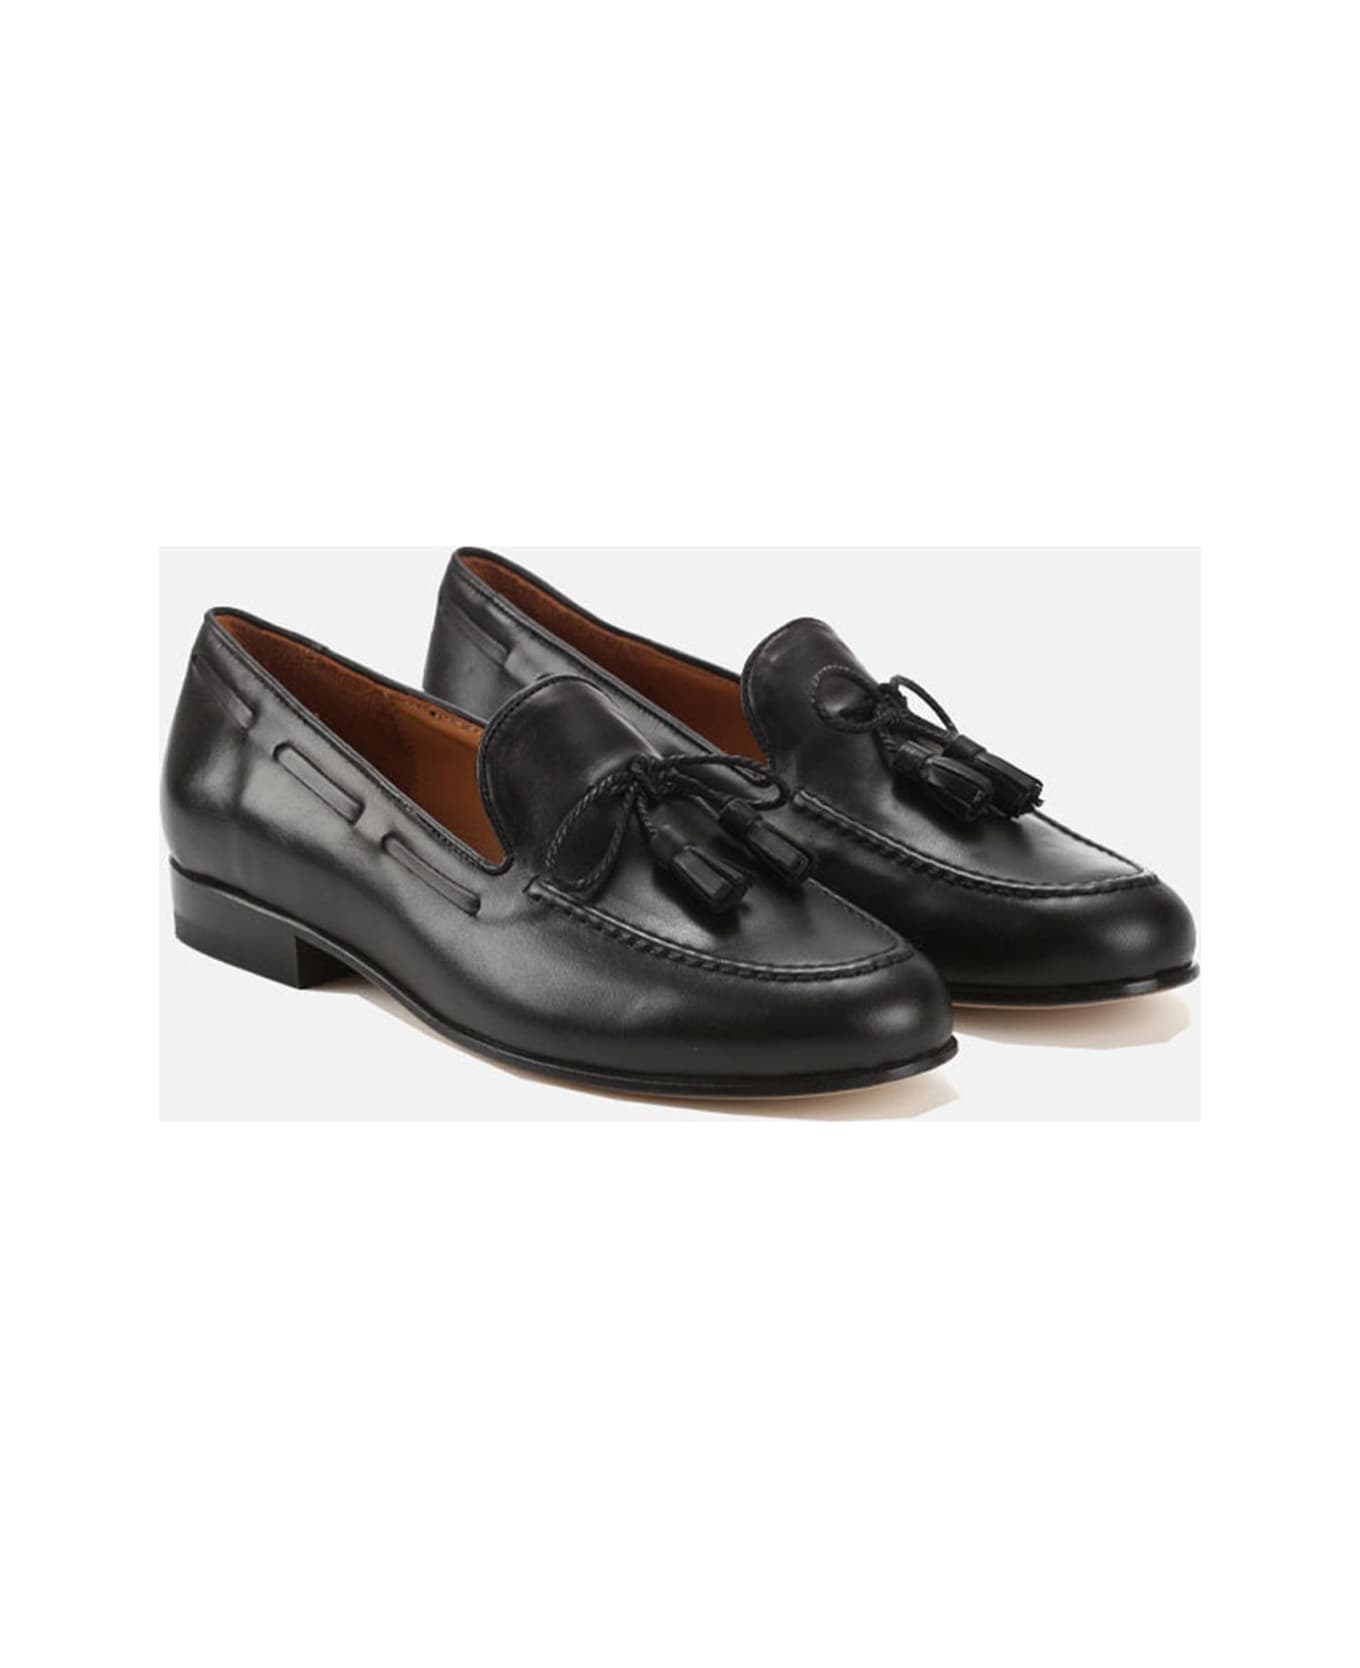 CB Made in Italy Leather Flats Todi - Black